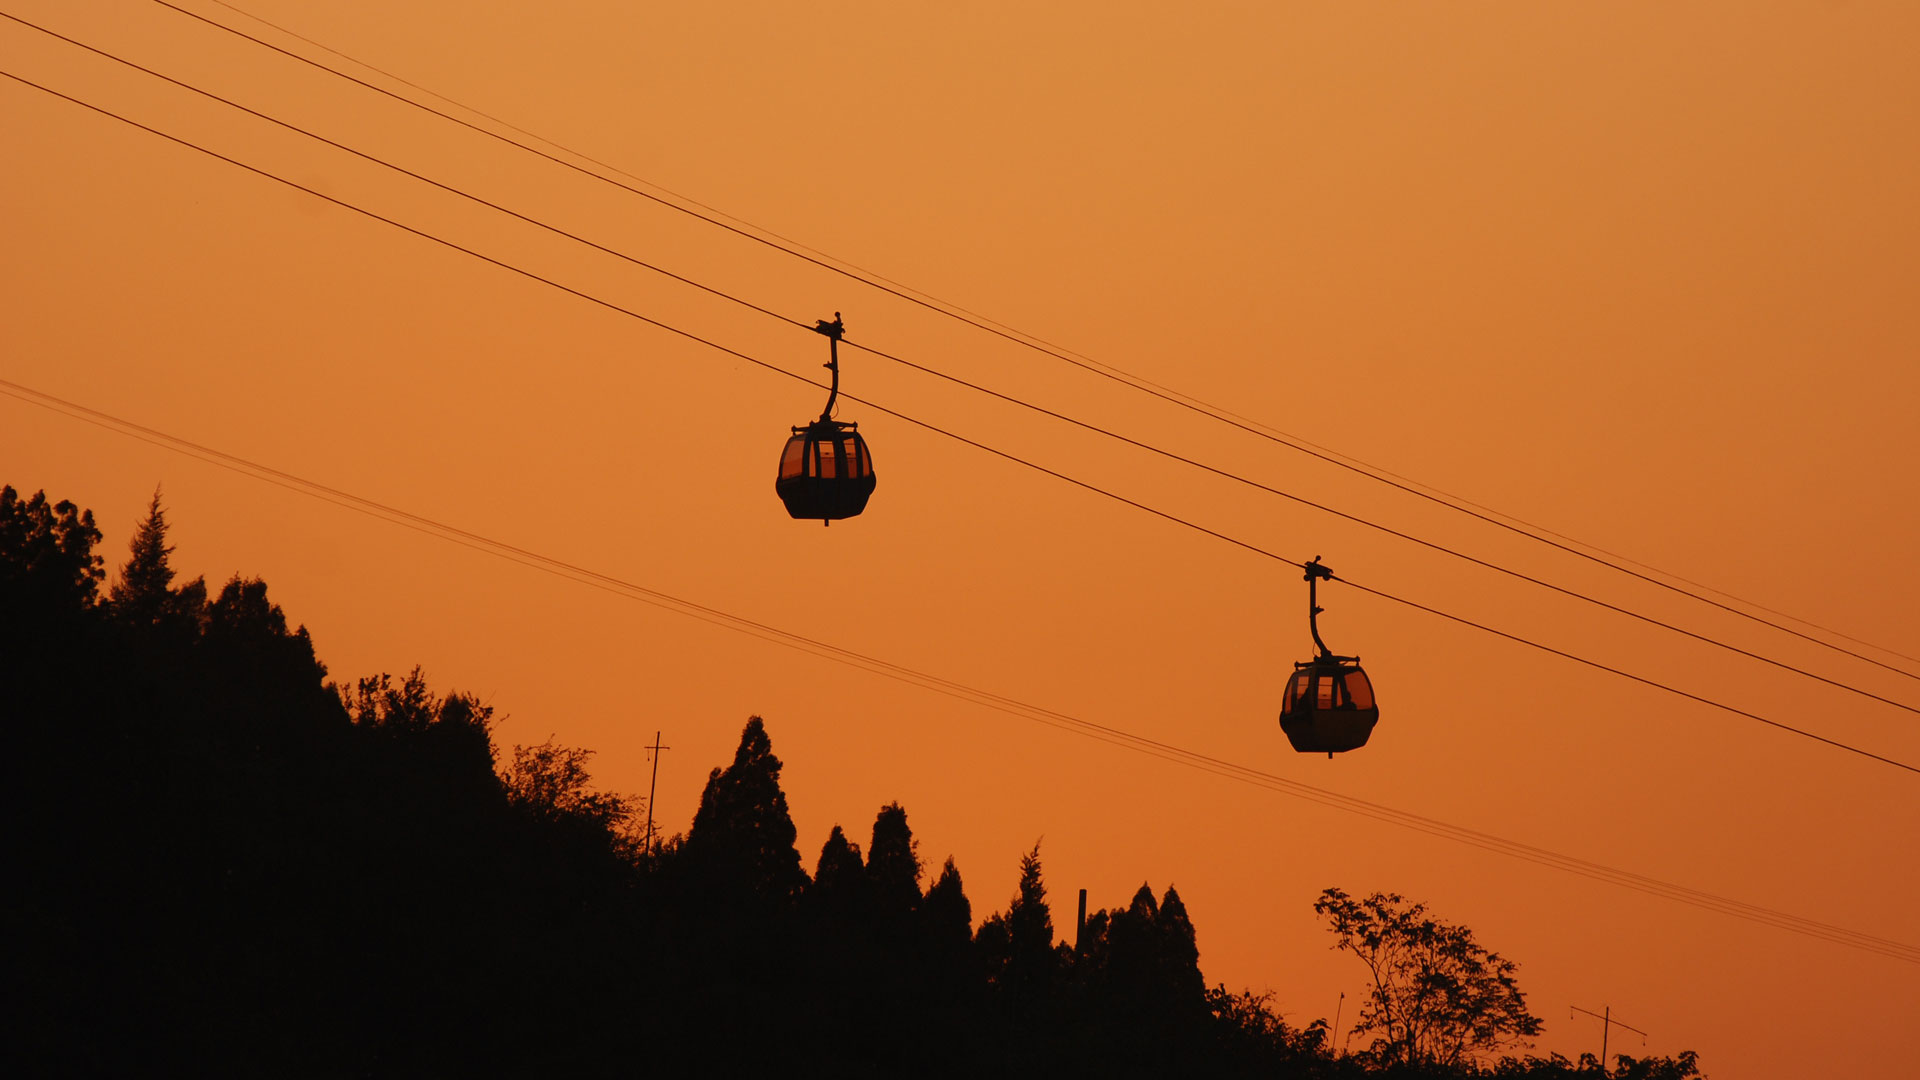 A scenic sunset at Lintong Lixing Cable-Car